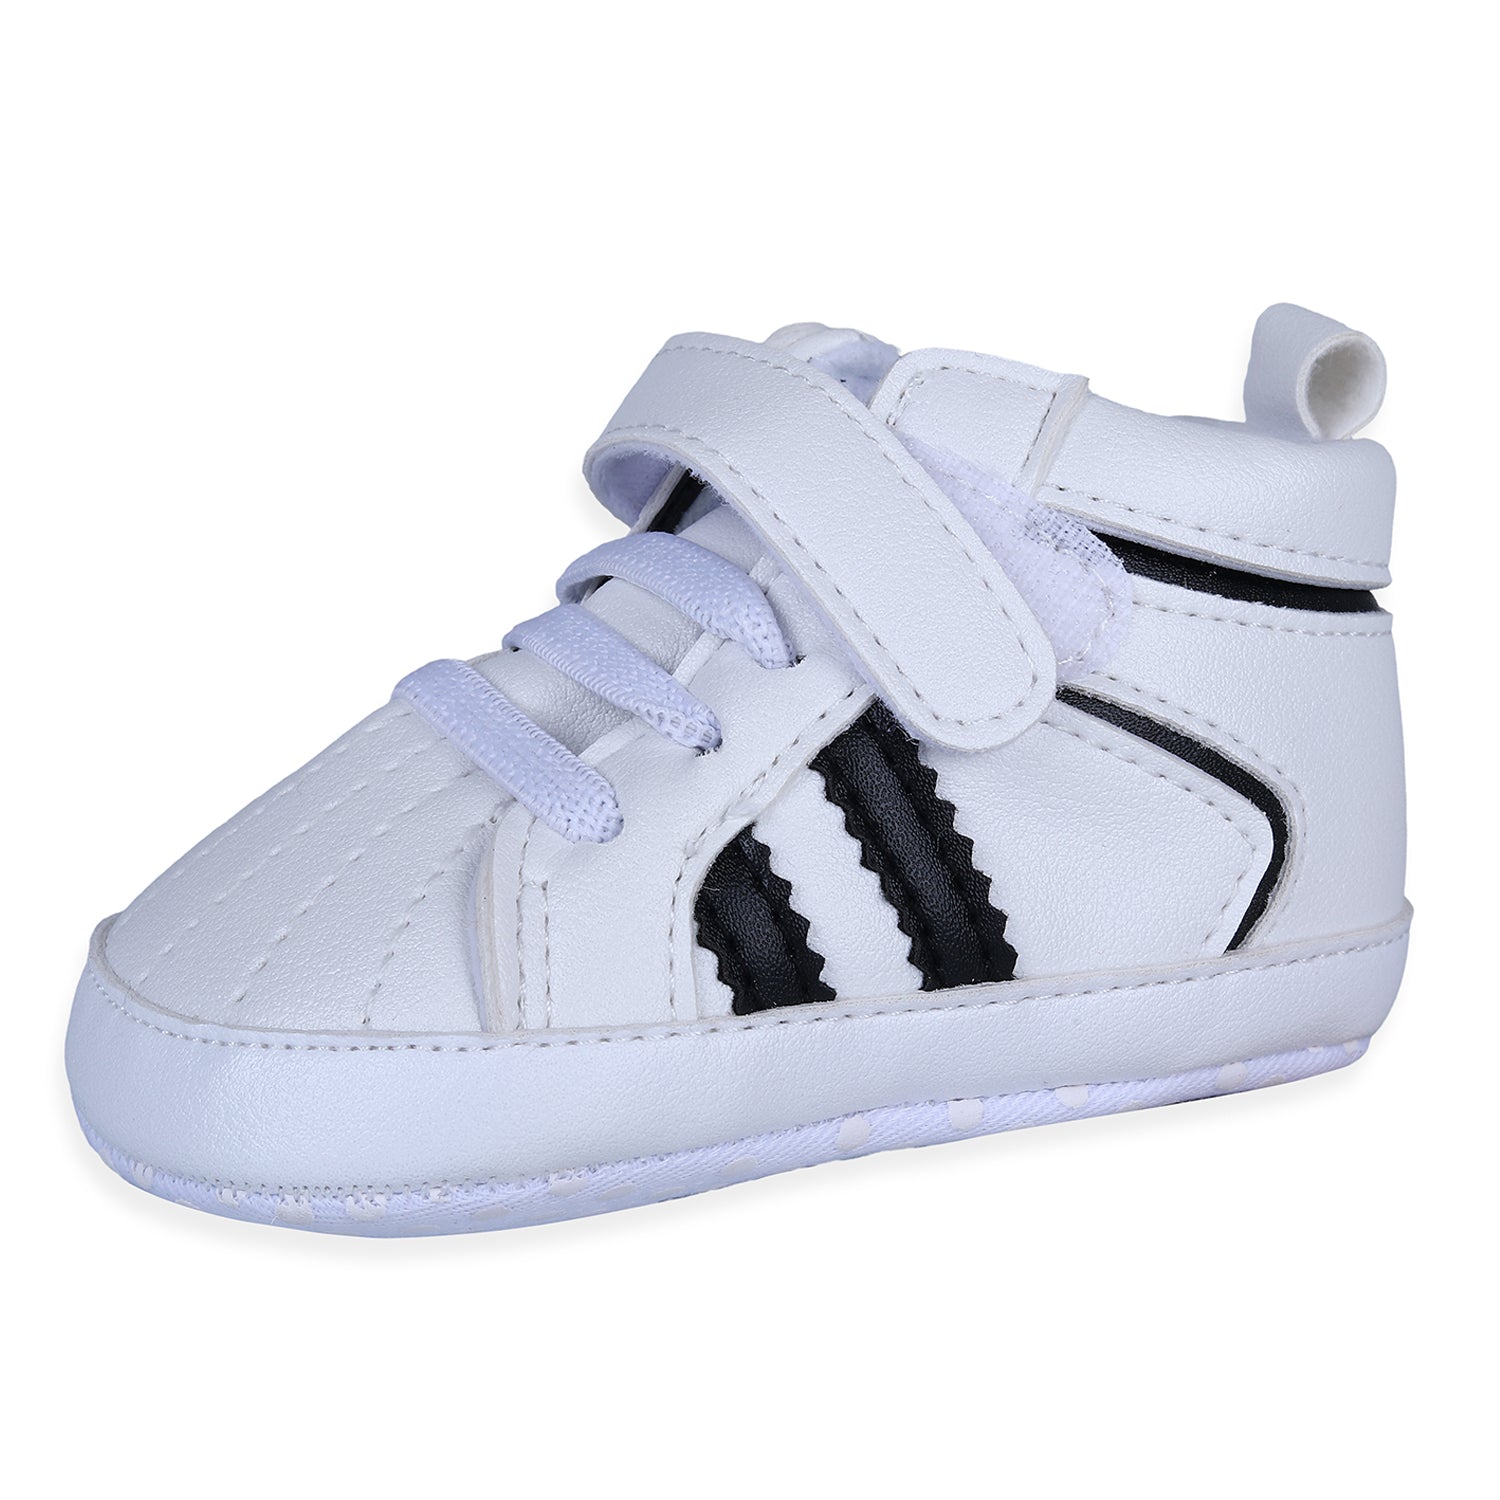 Classic Stripes Comfortable And Breathable Anti-Slip Sneaker Shoes - White - Baby Moo